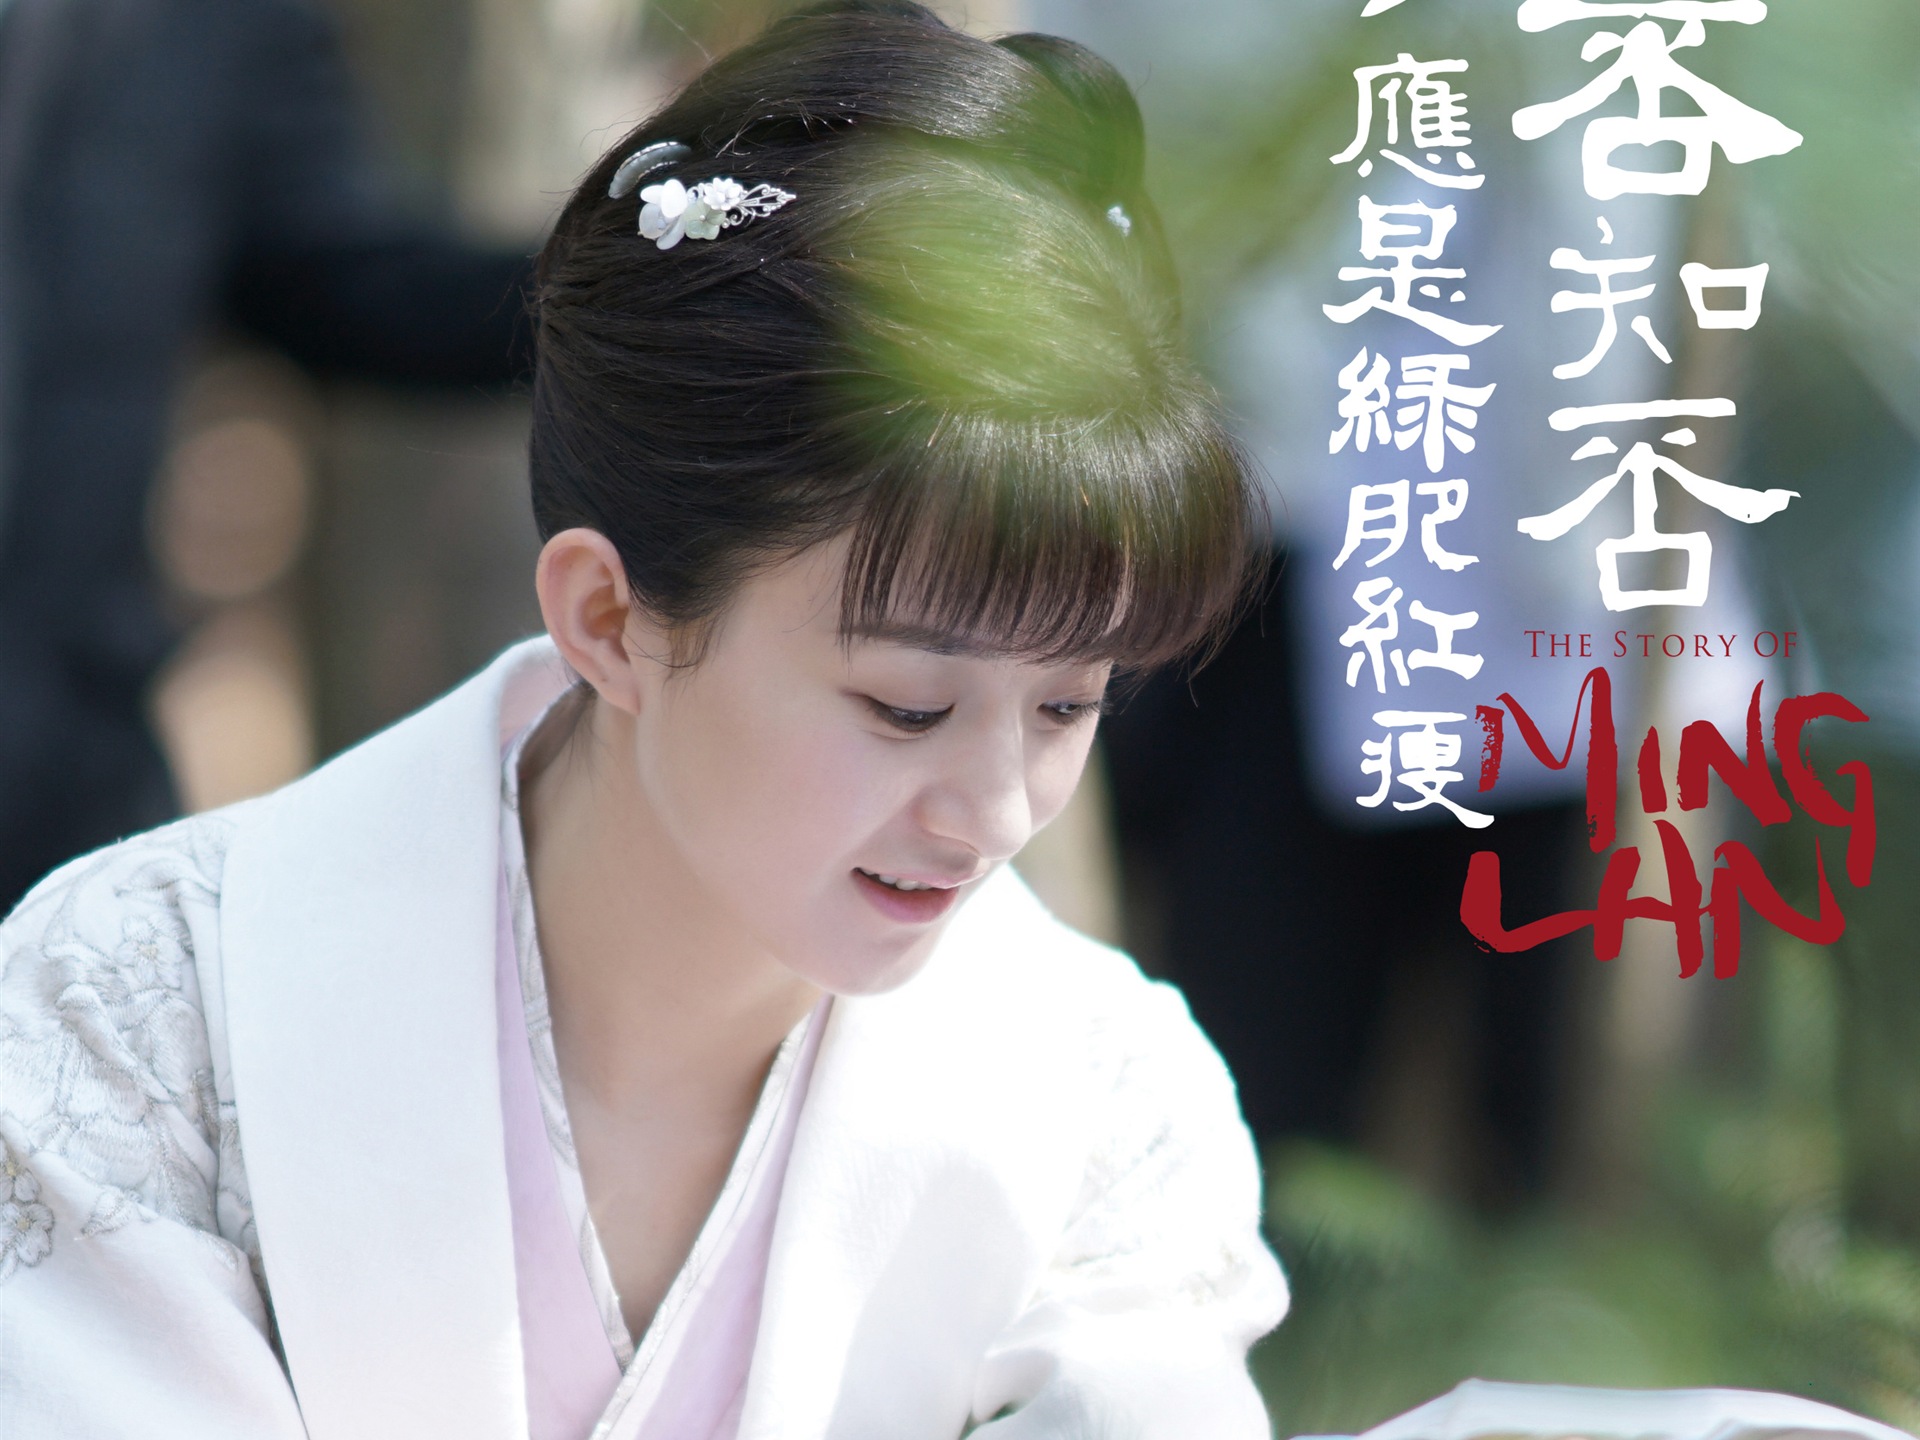 The Story Of MingLan, TV series HD wallpapers #27 - 1920x1440